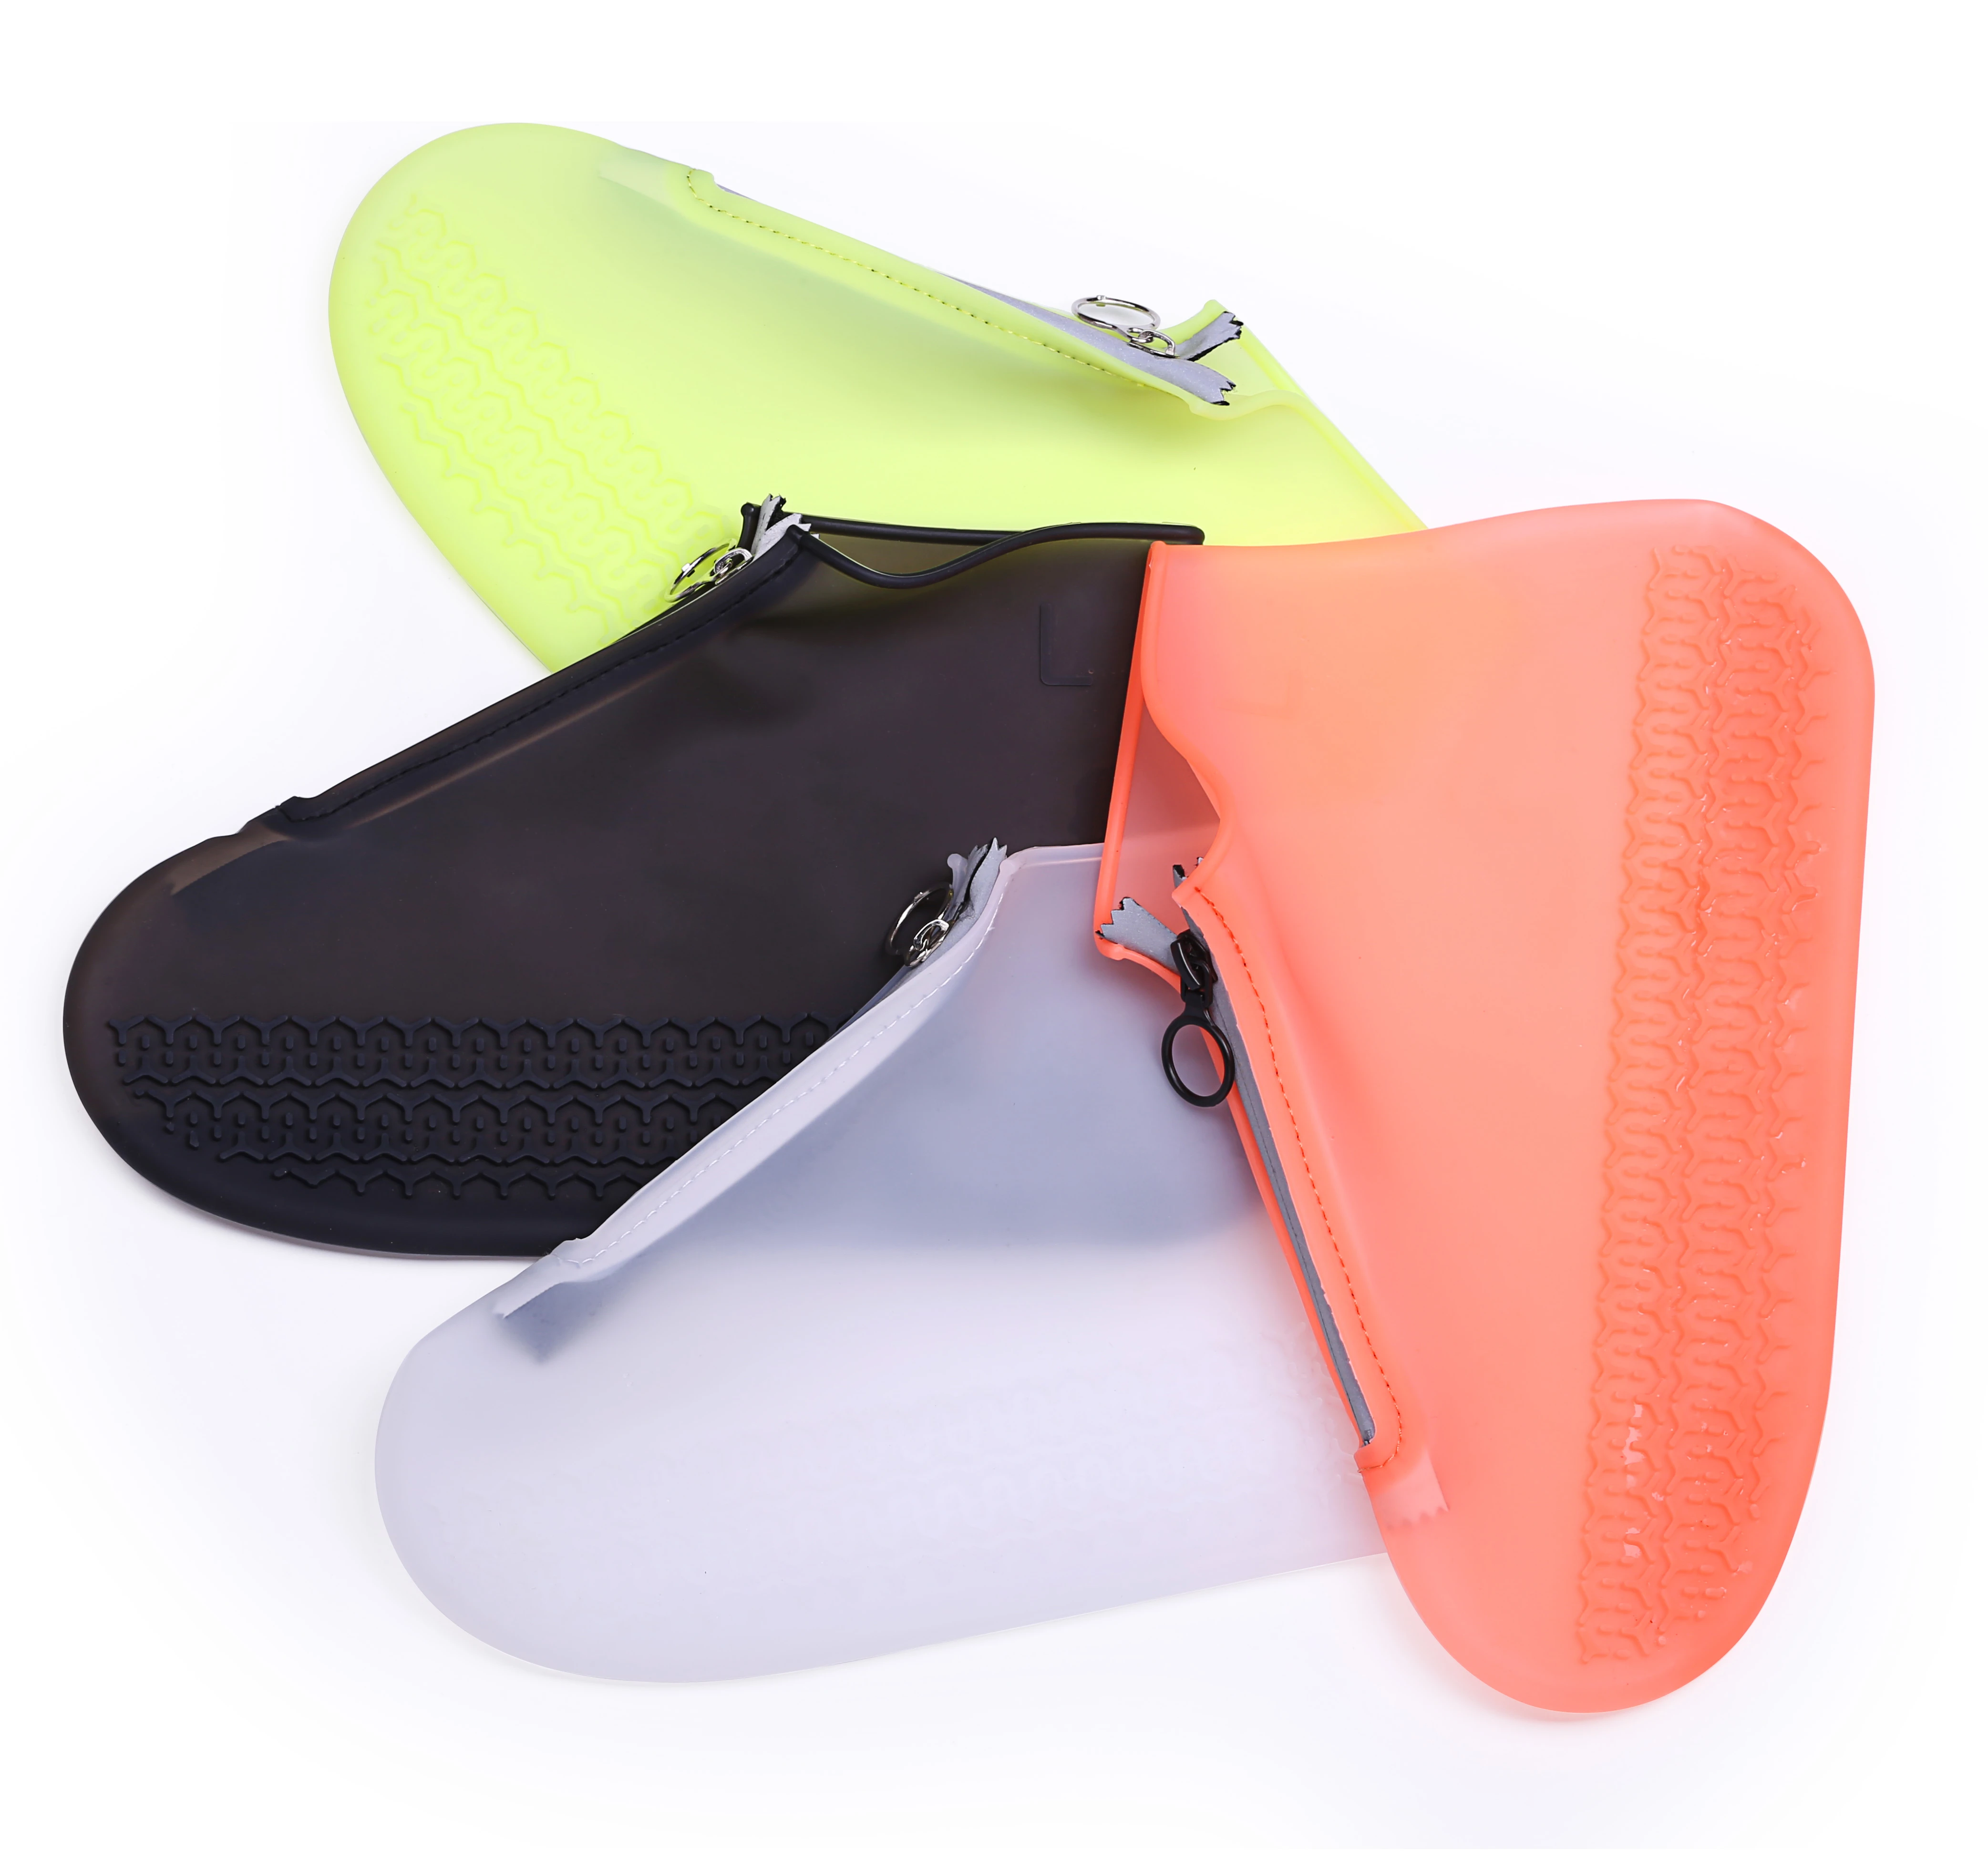 New Creative Antiskid Portable Silicone Cover Shoes Waterproof Rain Boots